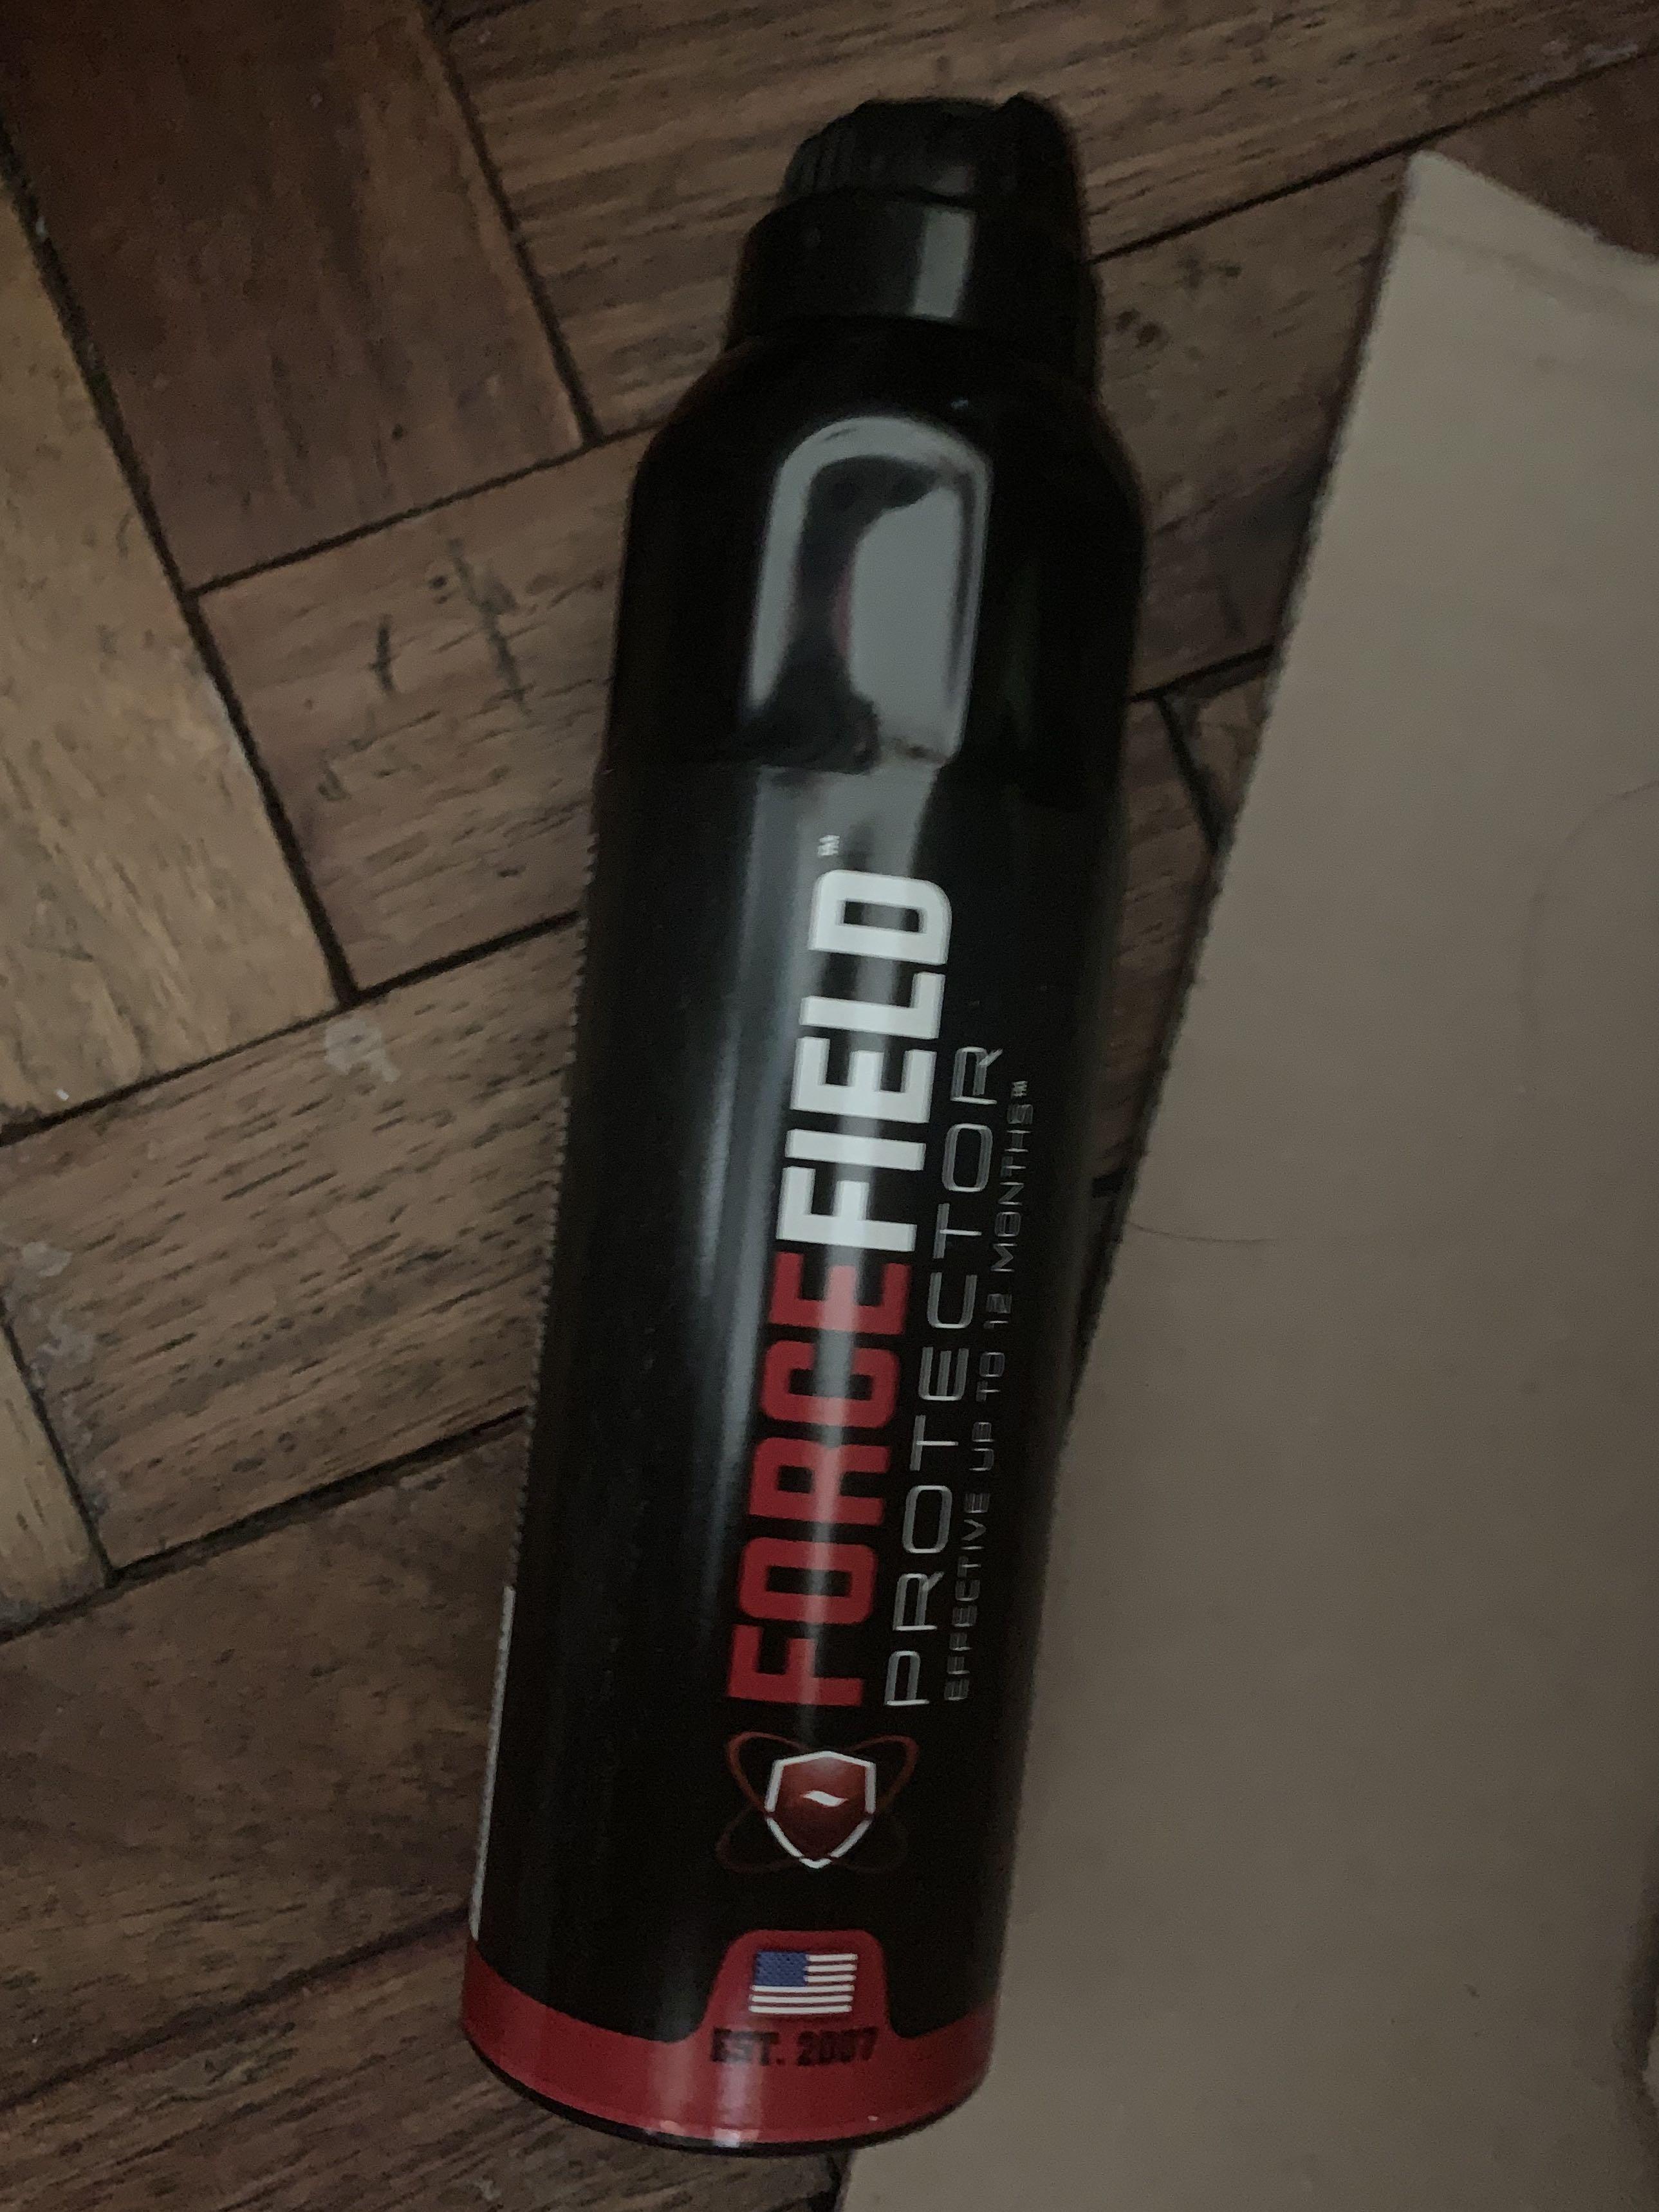 forcefield protector spray